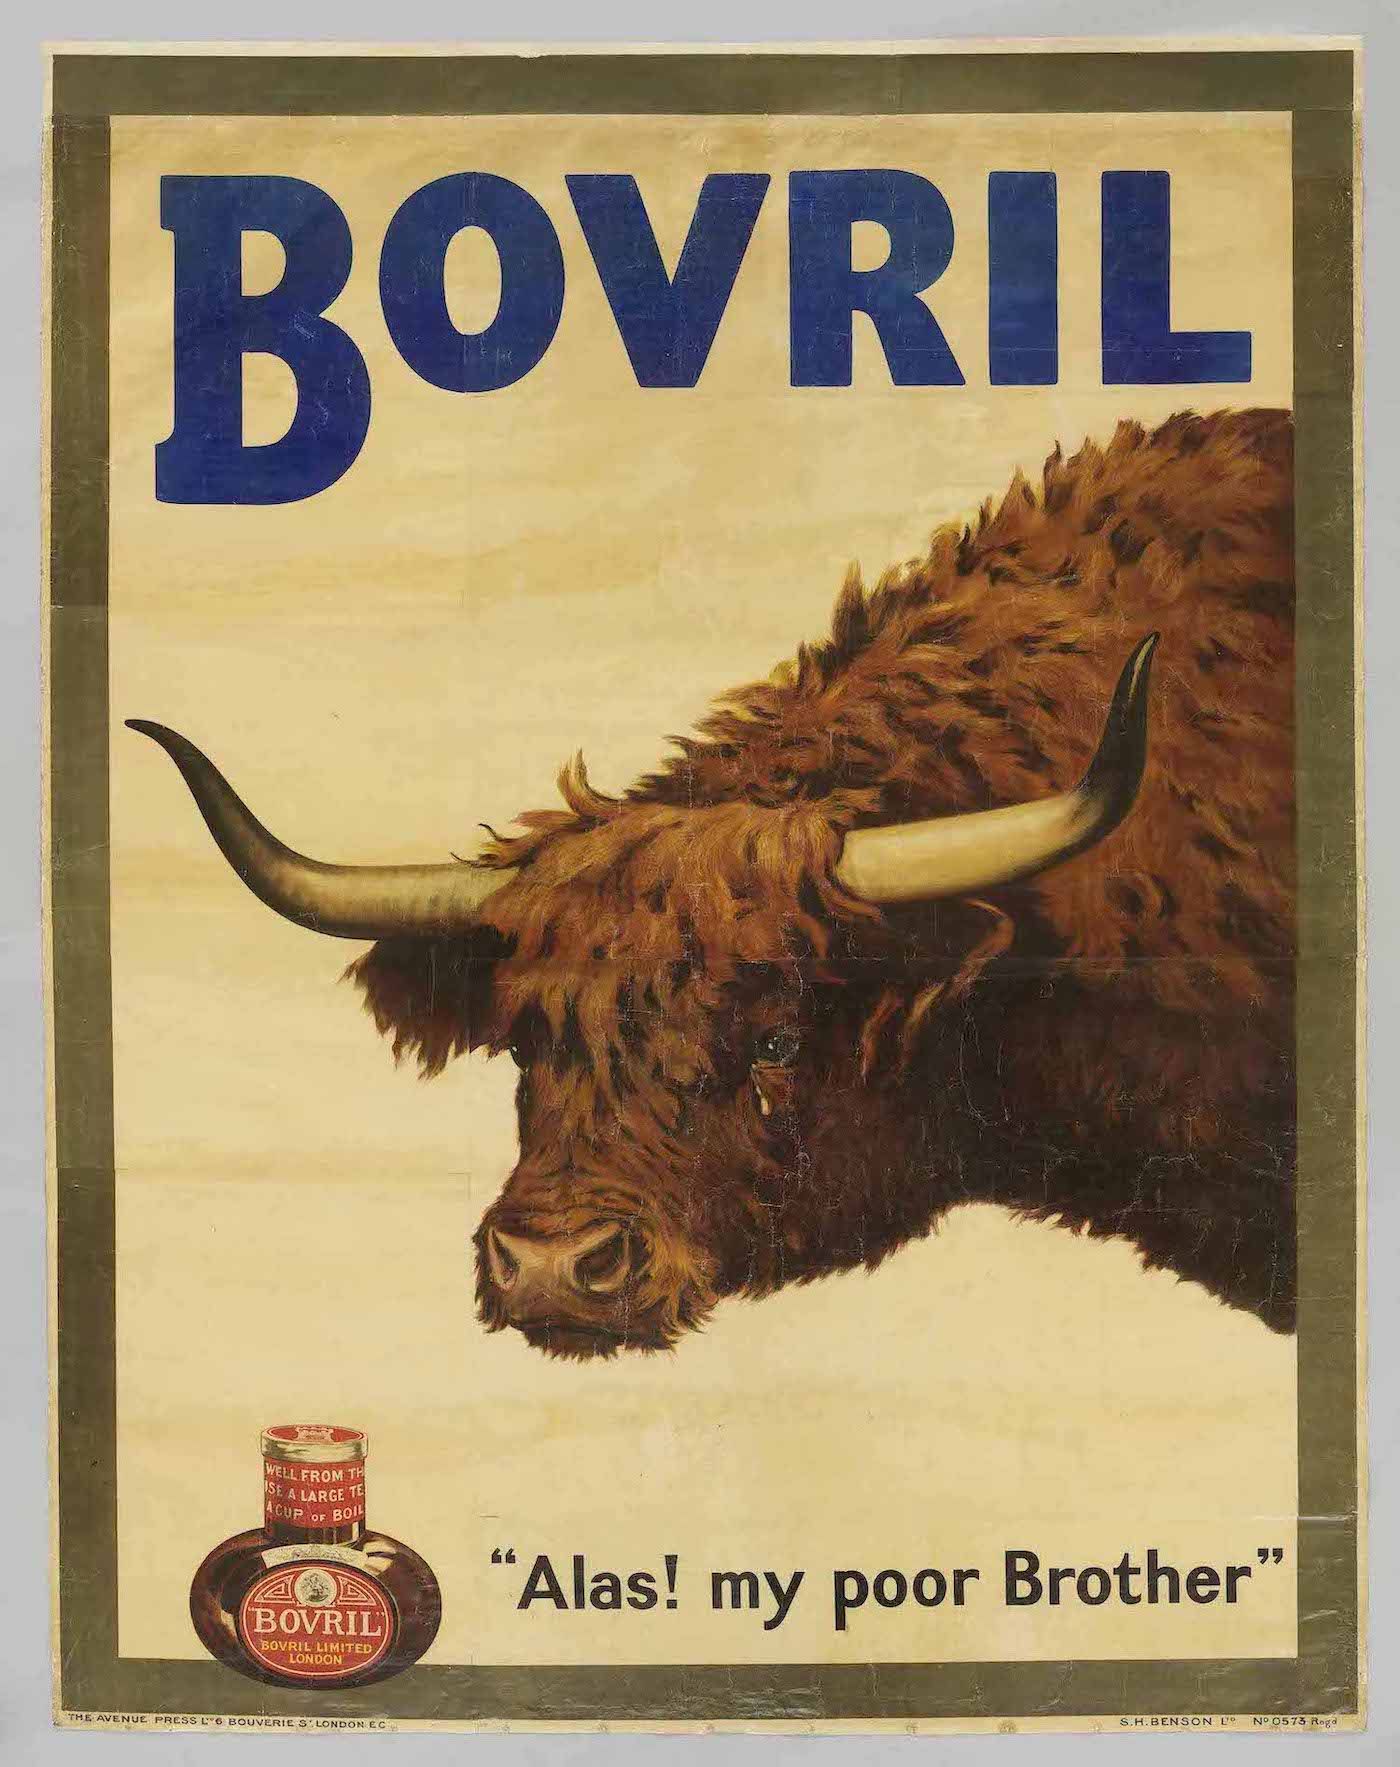 "Alas! My poor Brother", poster by W.H. Caffyn advertising Bovril. Great Britain, 1905.